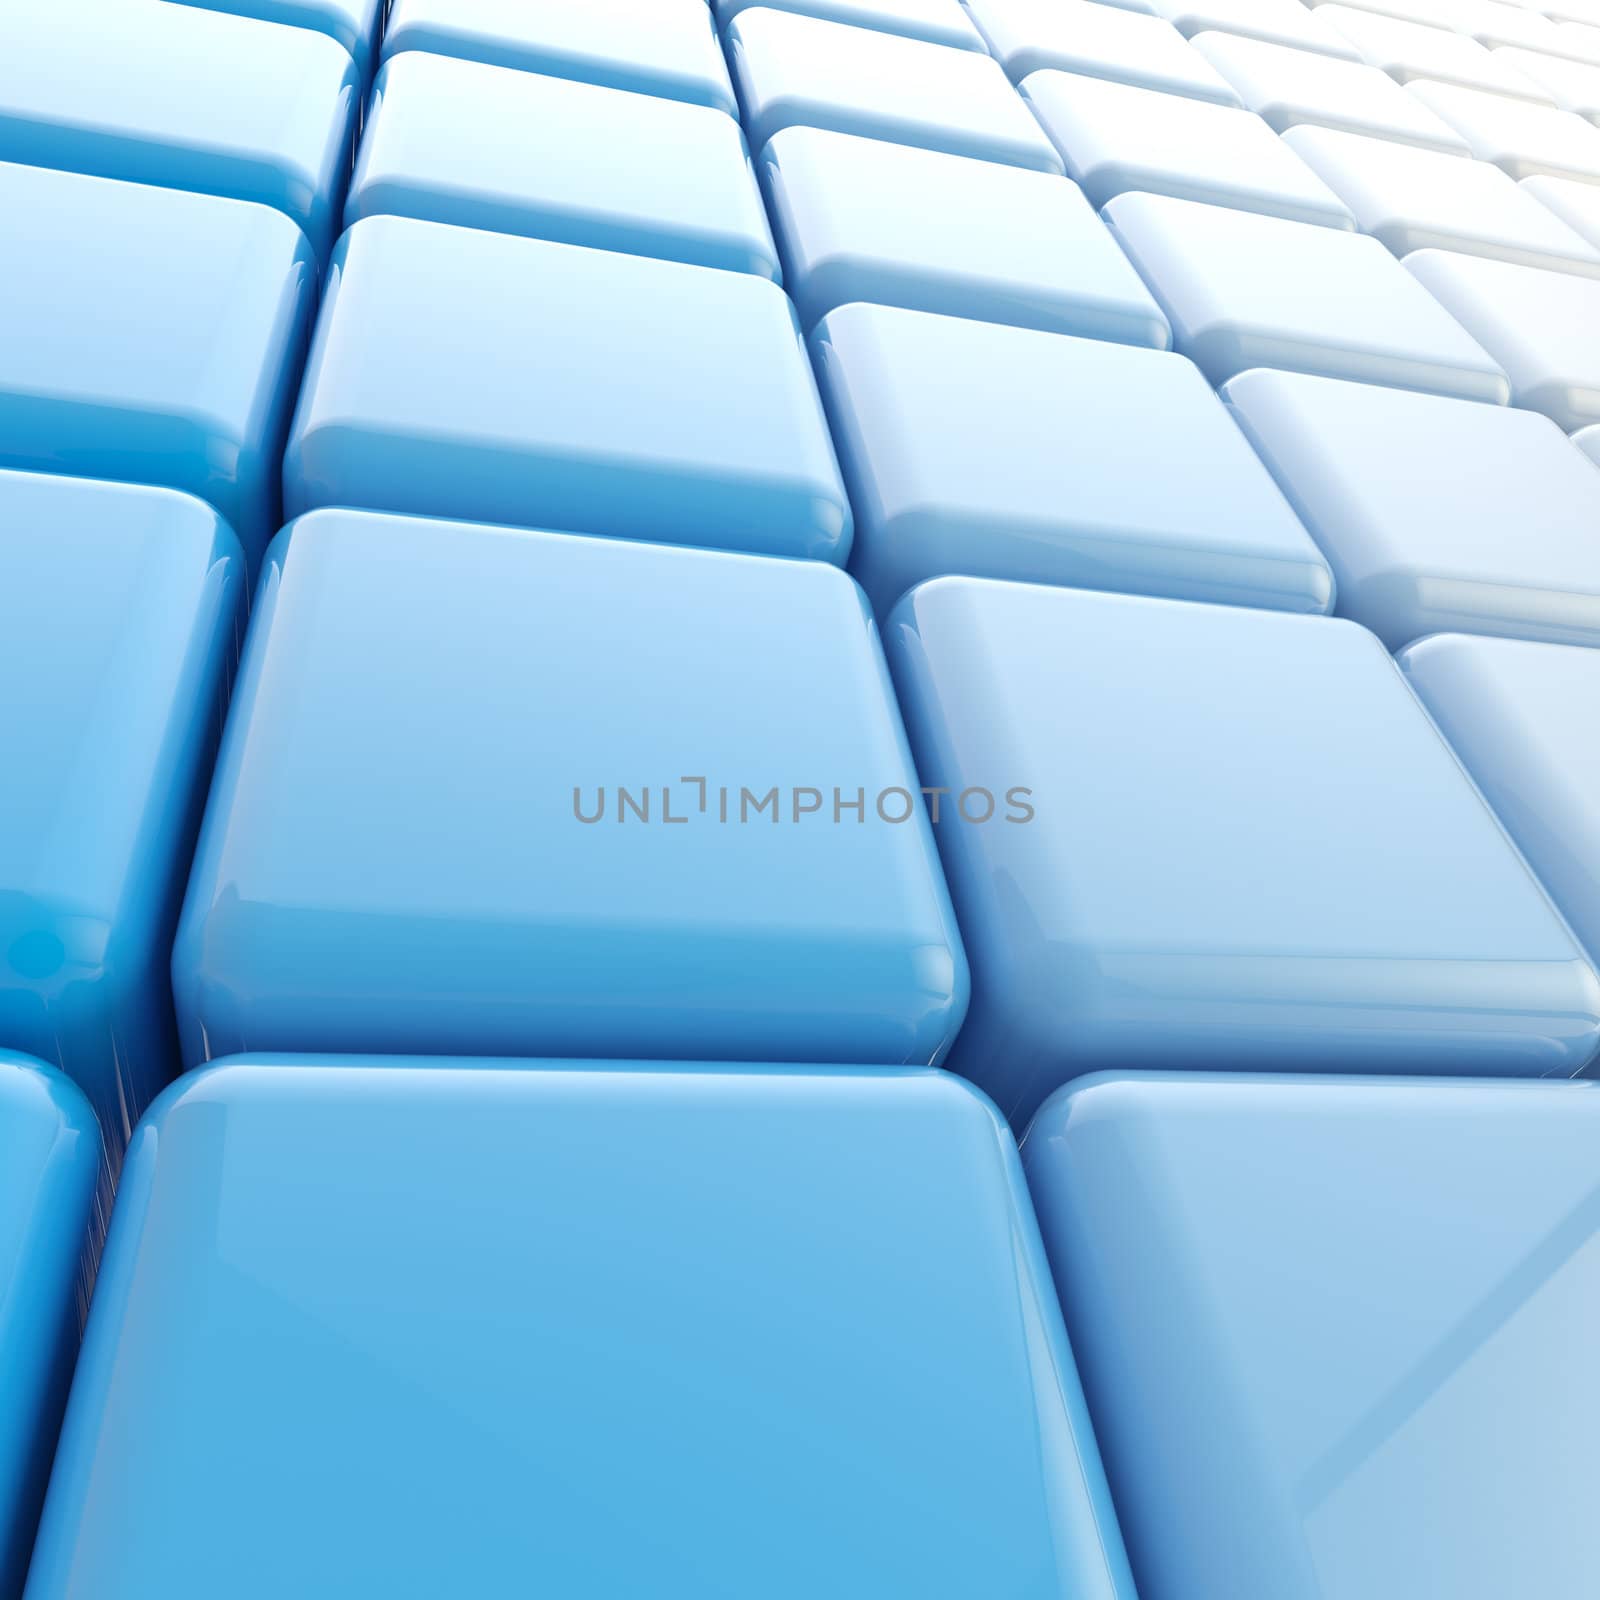 Abstract background made of blue glossy plastic cubes